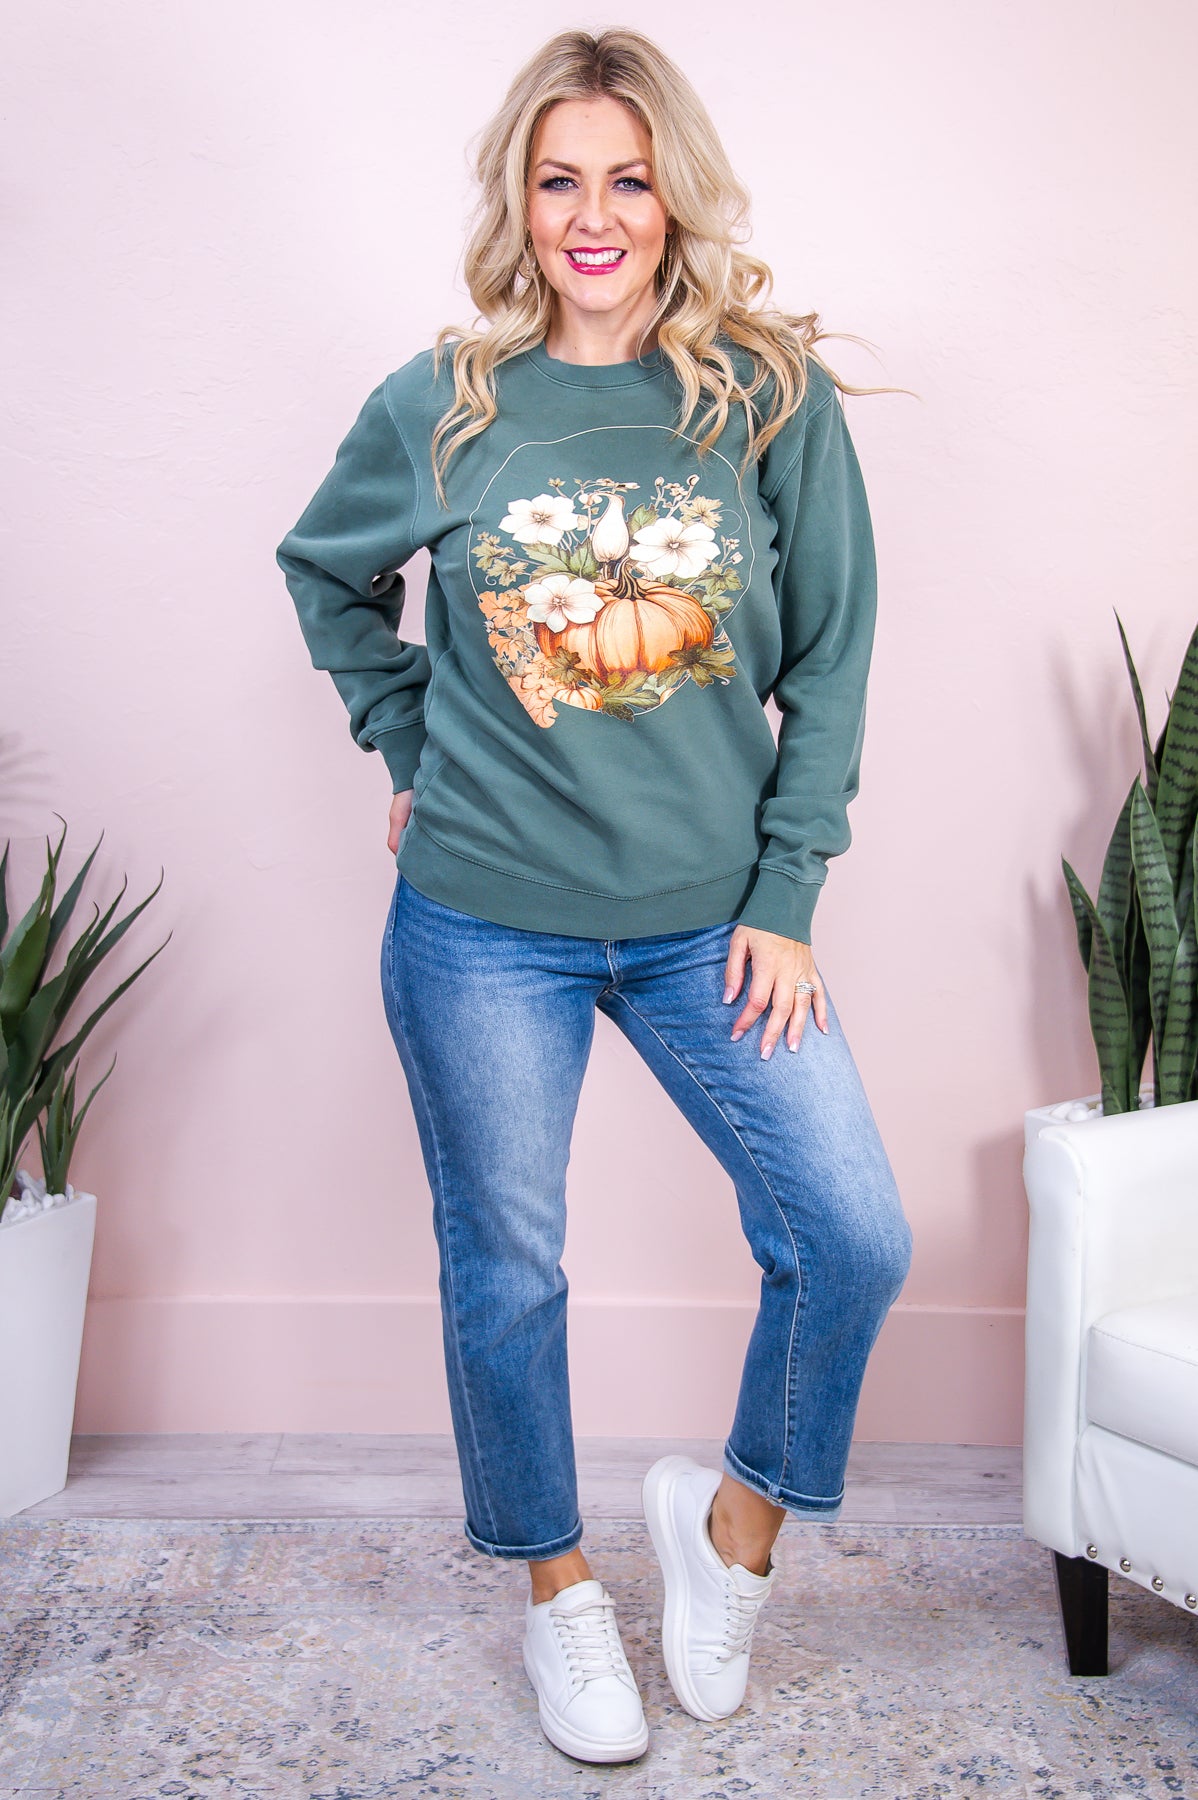 Gourd' Vibes Only Pigment Alpine Green Pumpkin Patch Graphic Sweatshirt - A2989PAG